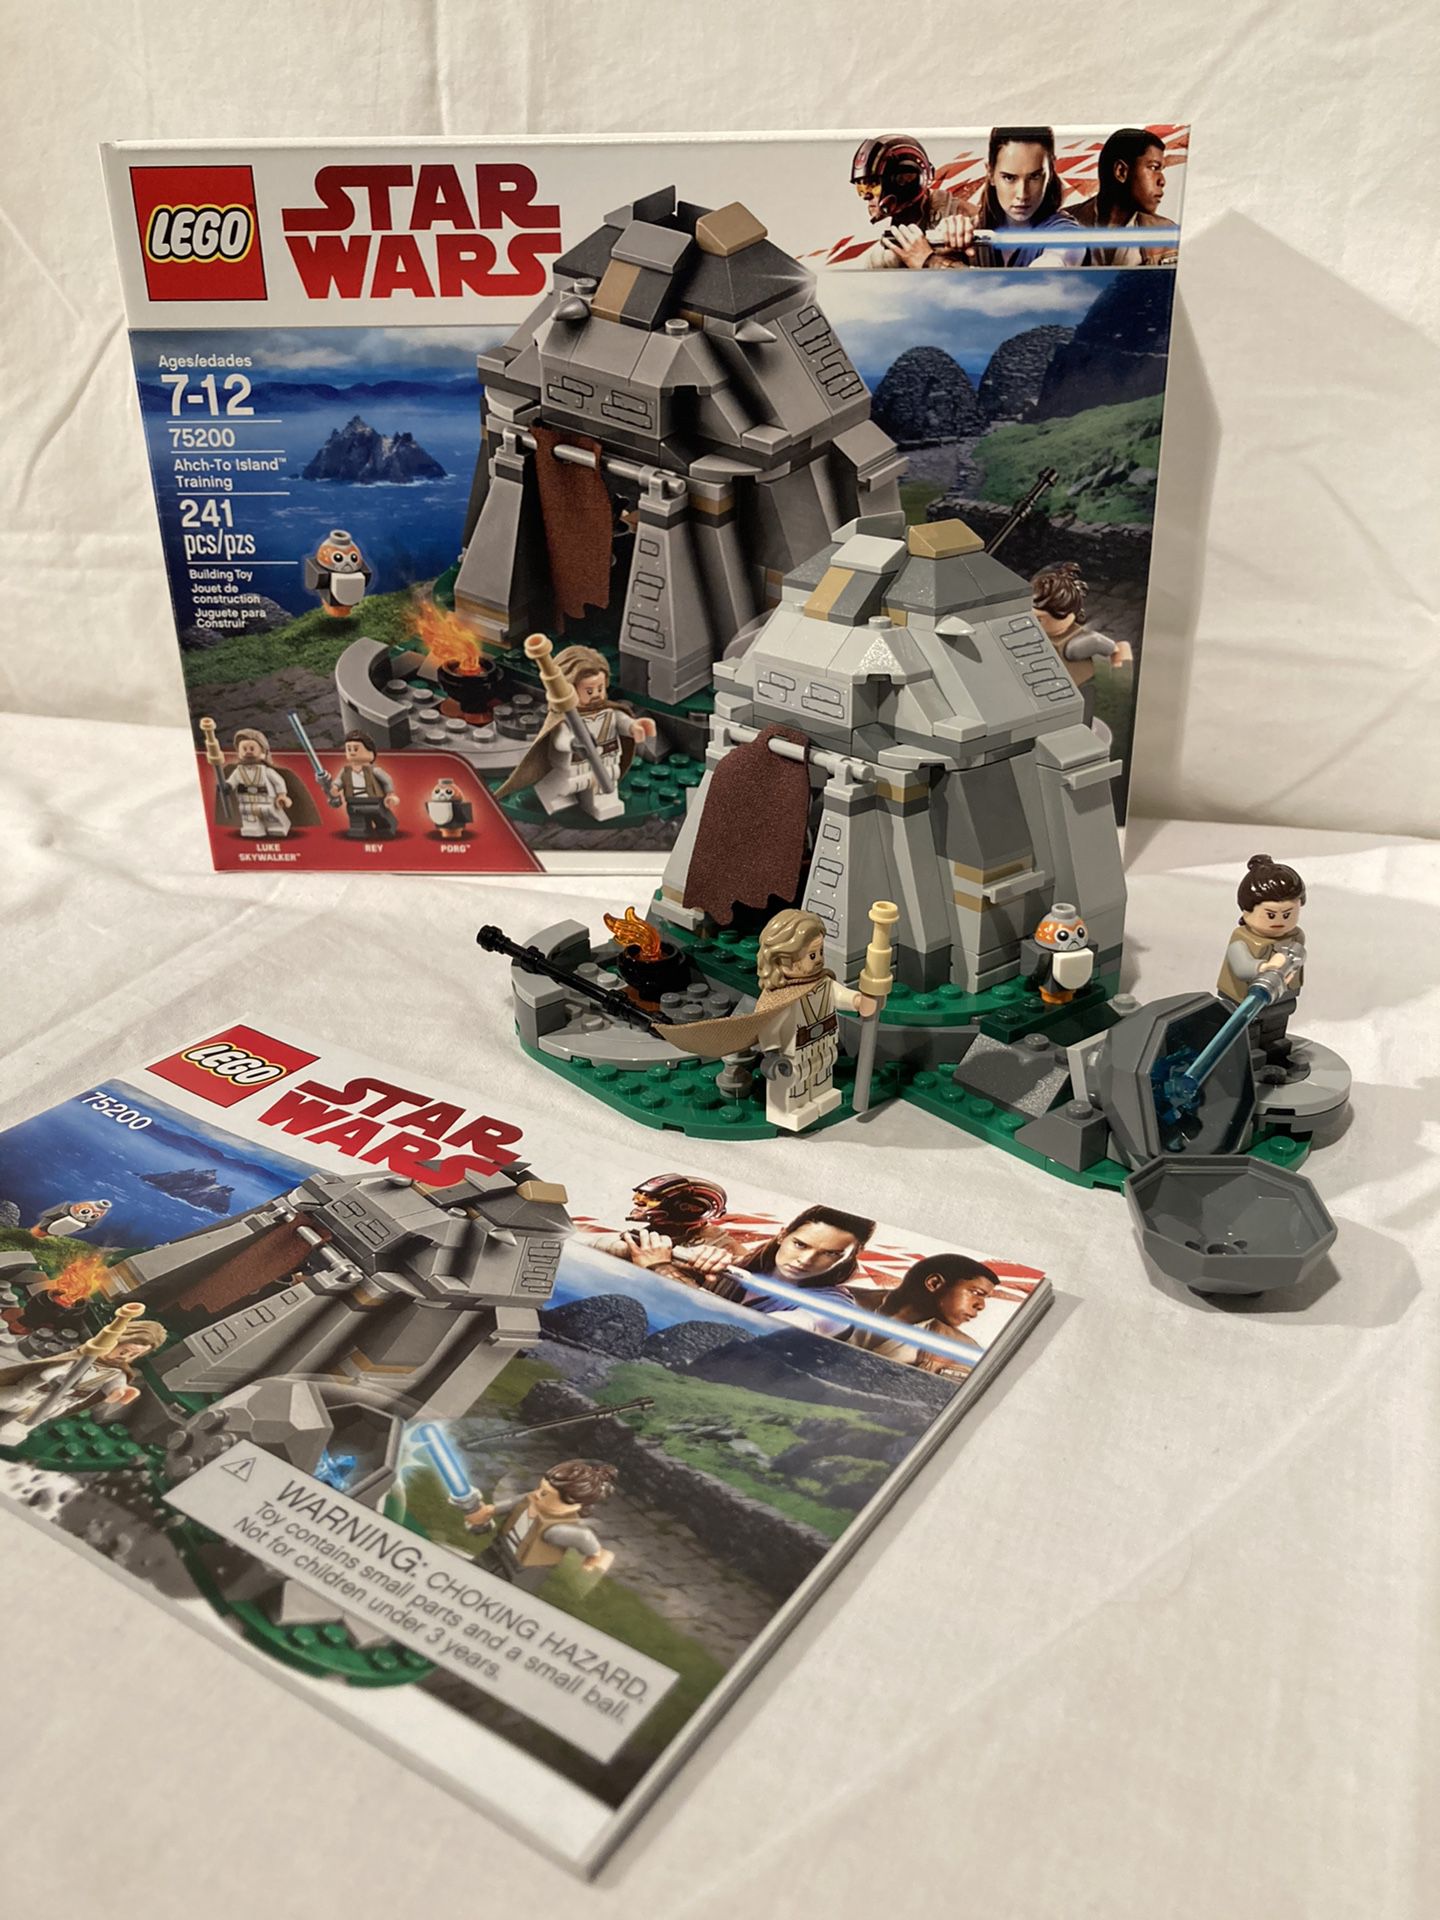 LEGO #75200 - “Star Wars” Ahch-To Island Training (Used) for Sale in Seattle, WA OfferUp